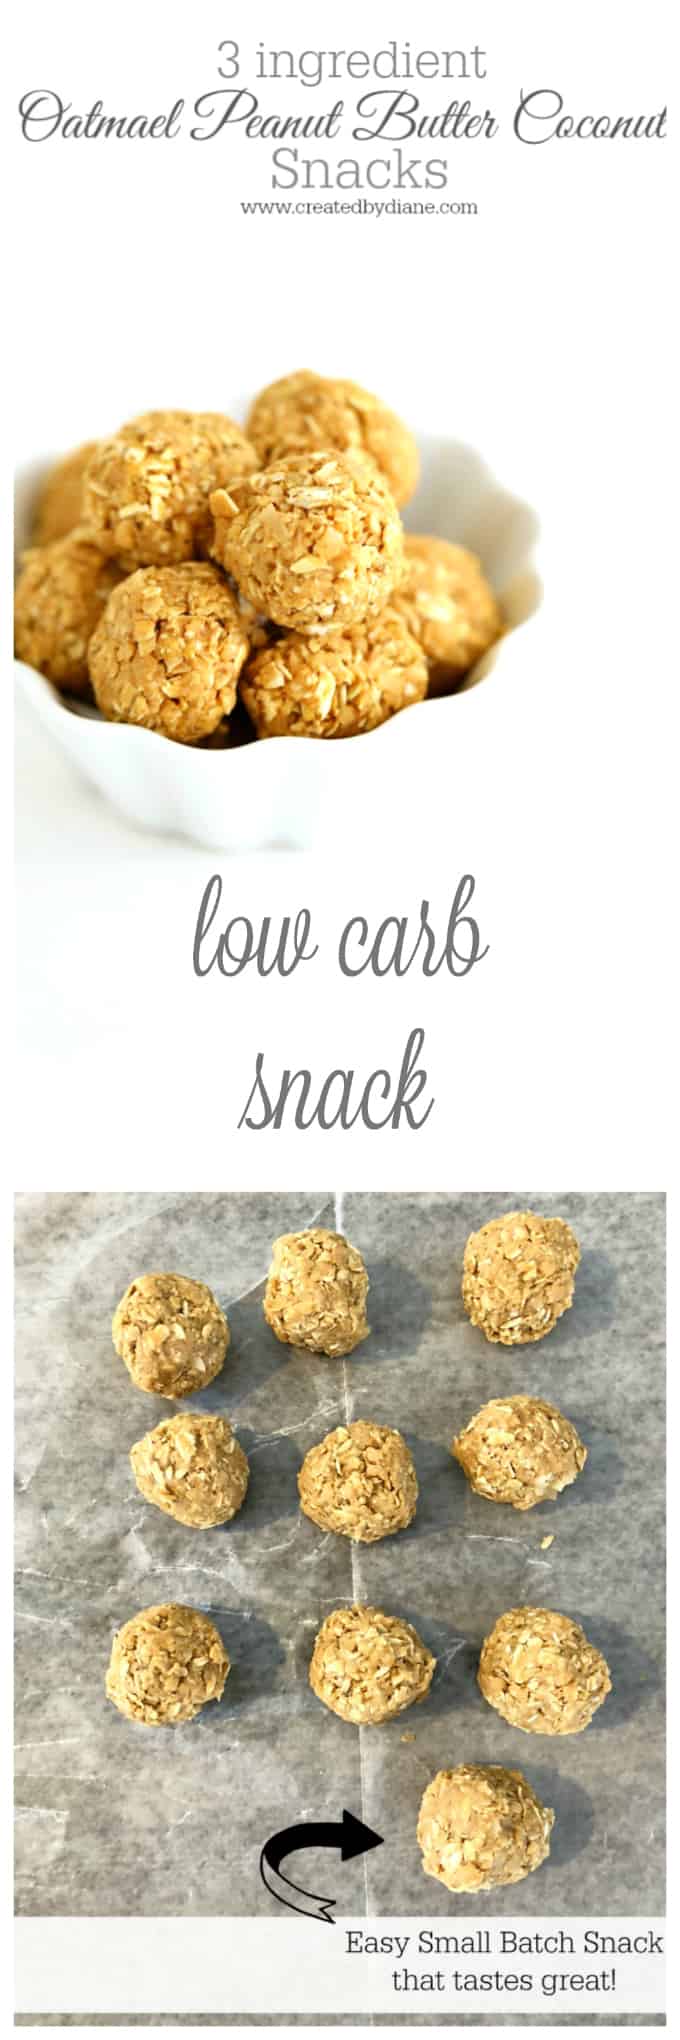 low carb snack 3 ingredient oatmeal peanut butter coconut balls www.createdbydiane.com